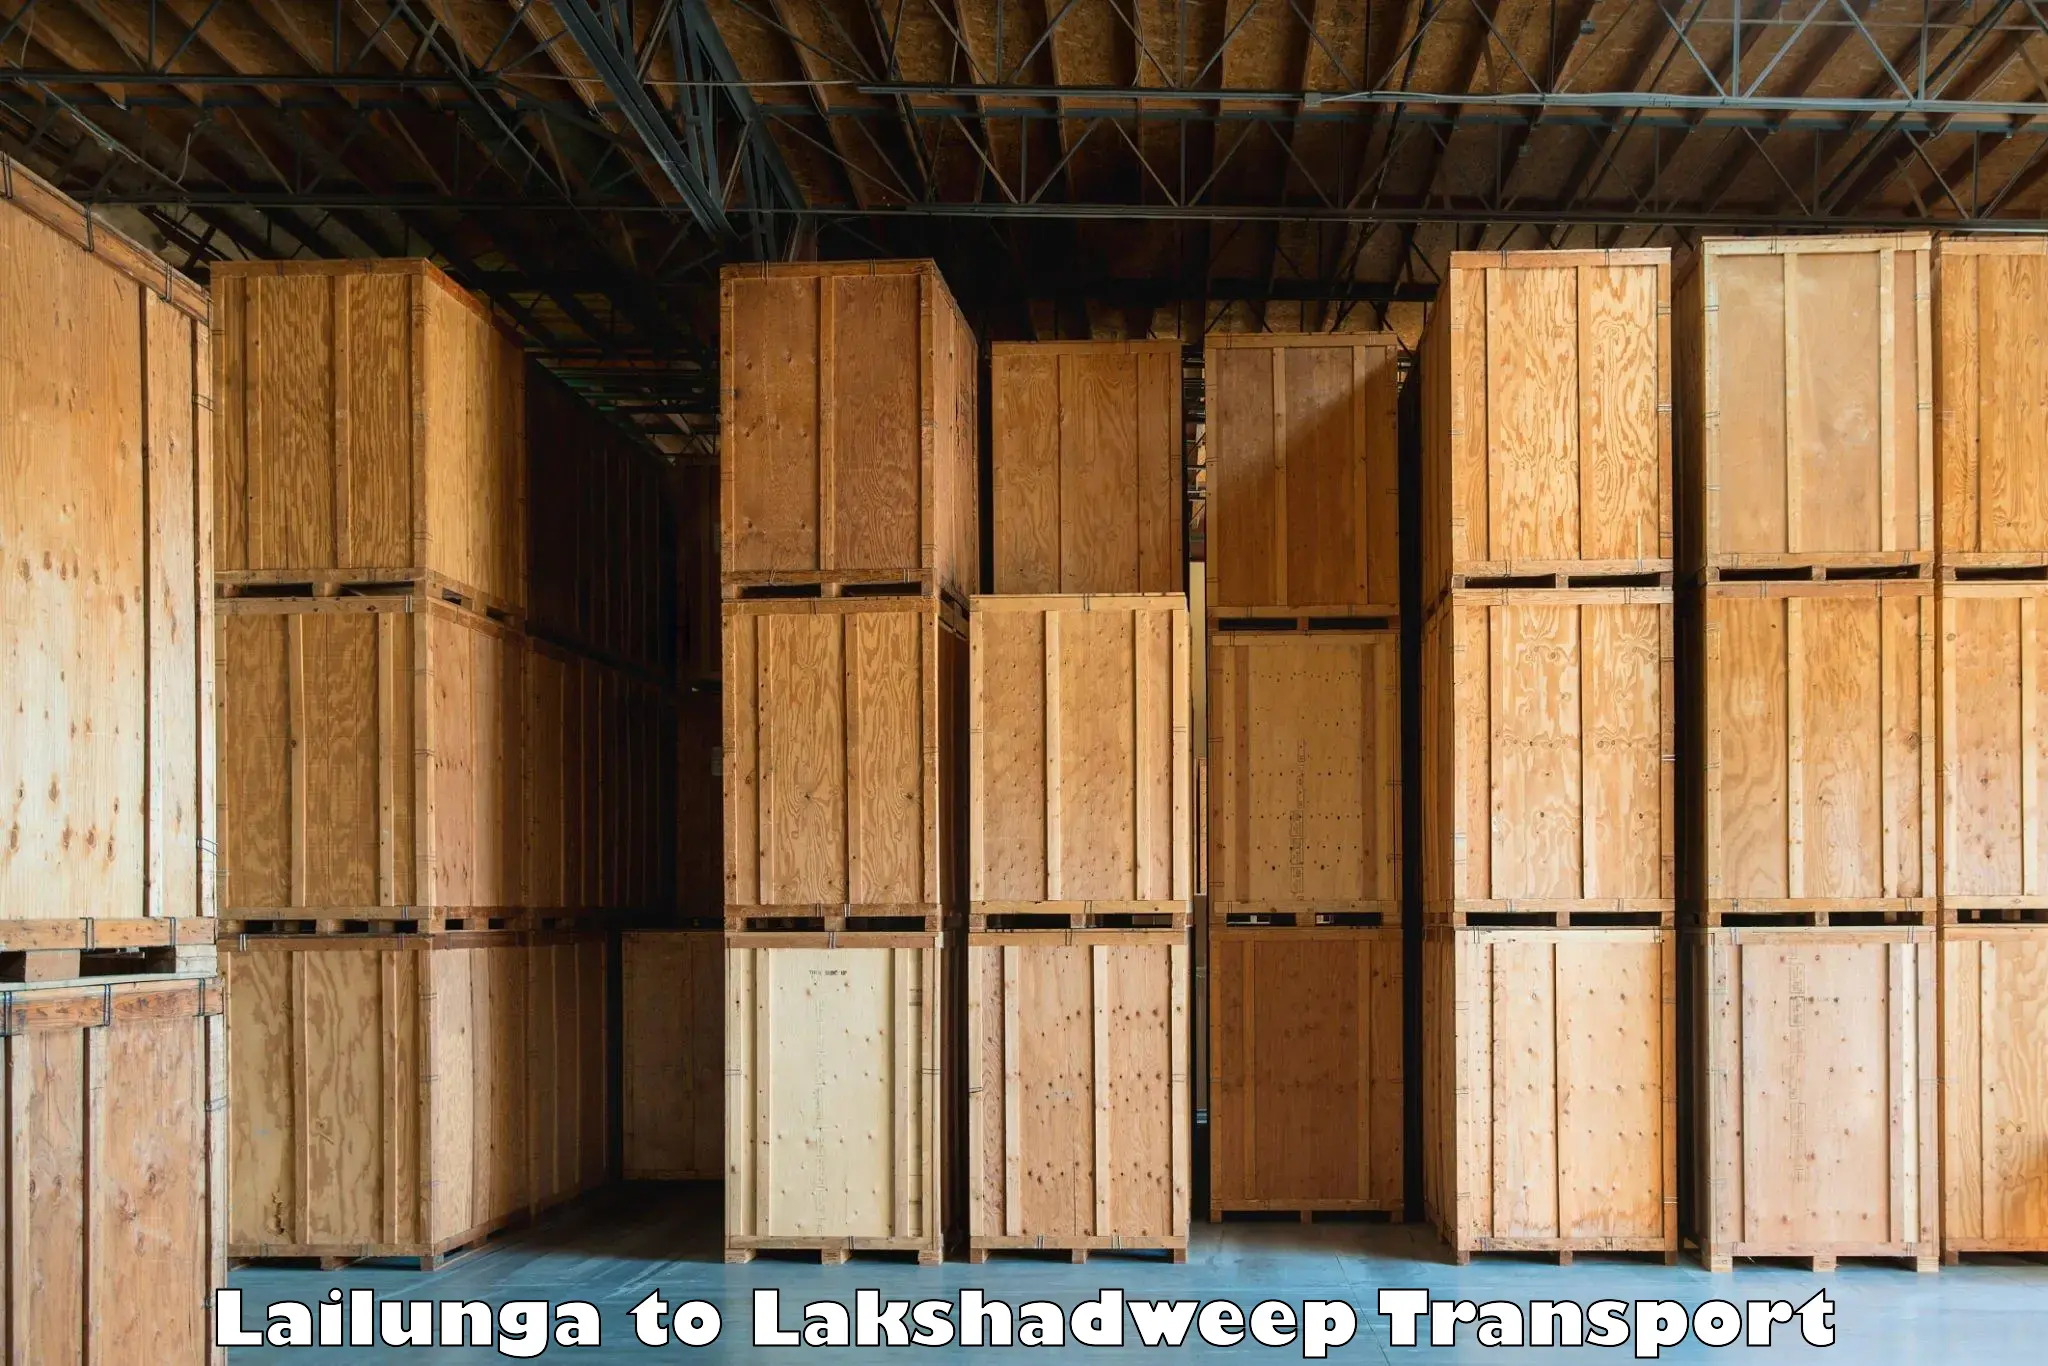 Express transport services Lailunga to Lakshadweep